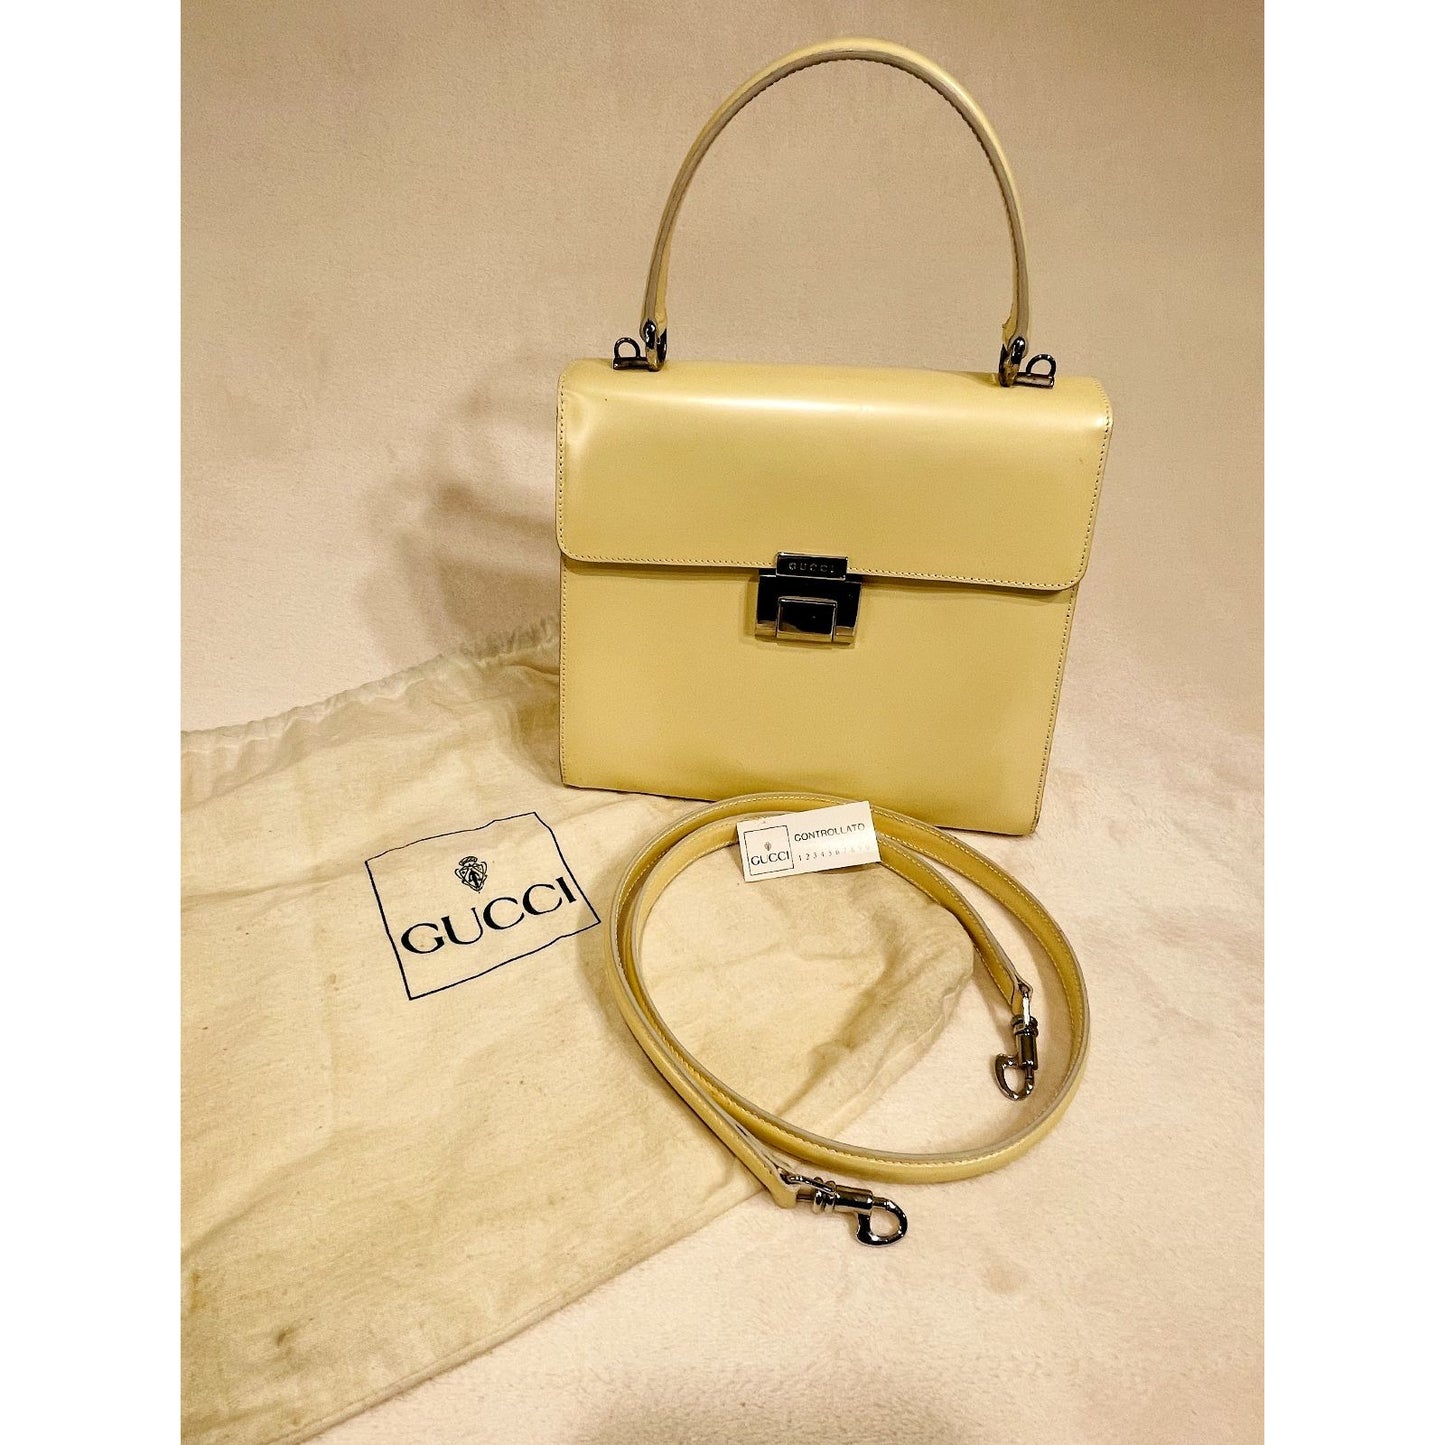 RARE, Gucci, pearly ivory/pale yellow smooth leather, Tom Ford era Padlock, two-way style with chrome hardware & removable strap